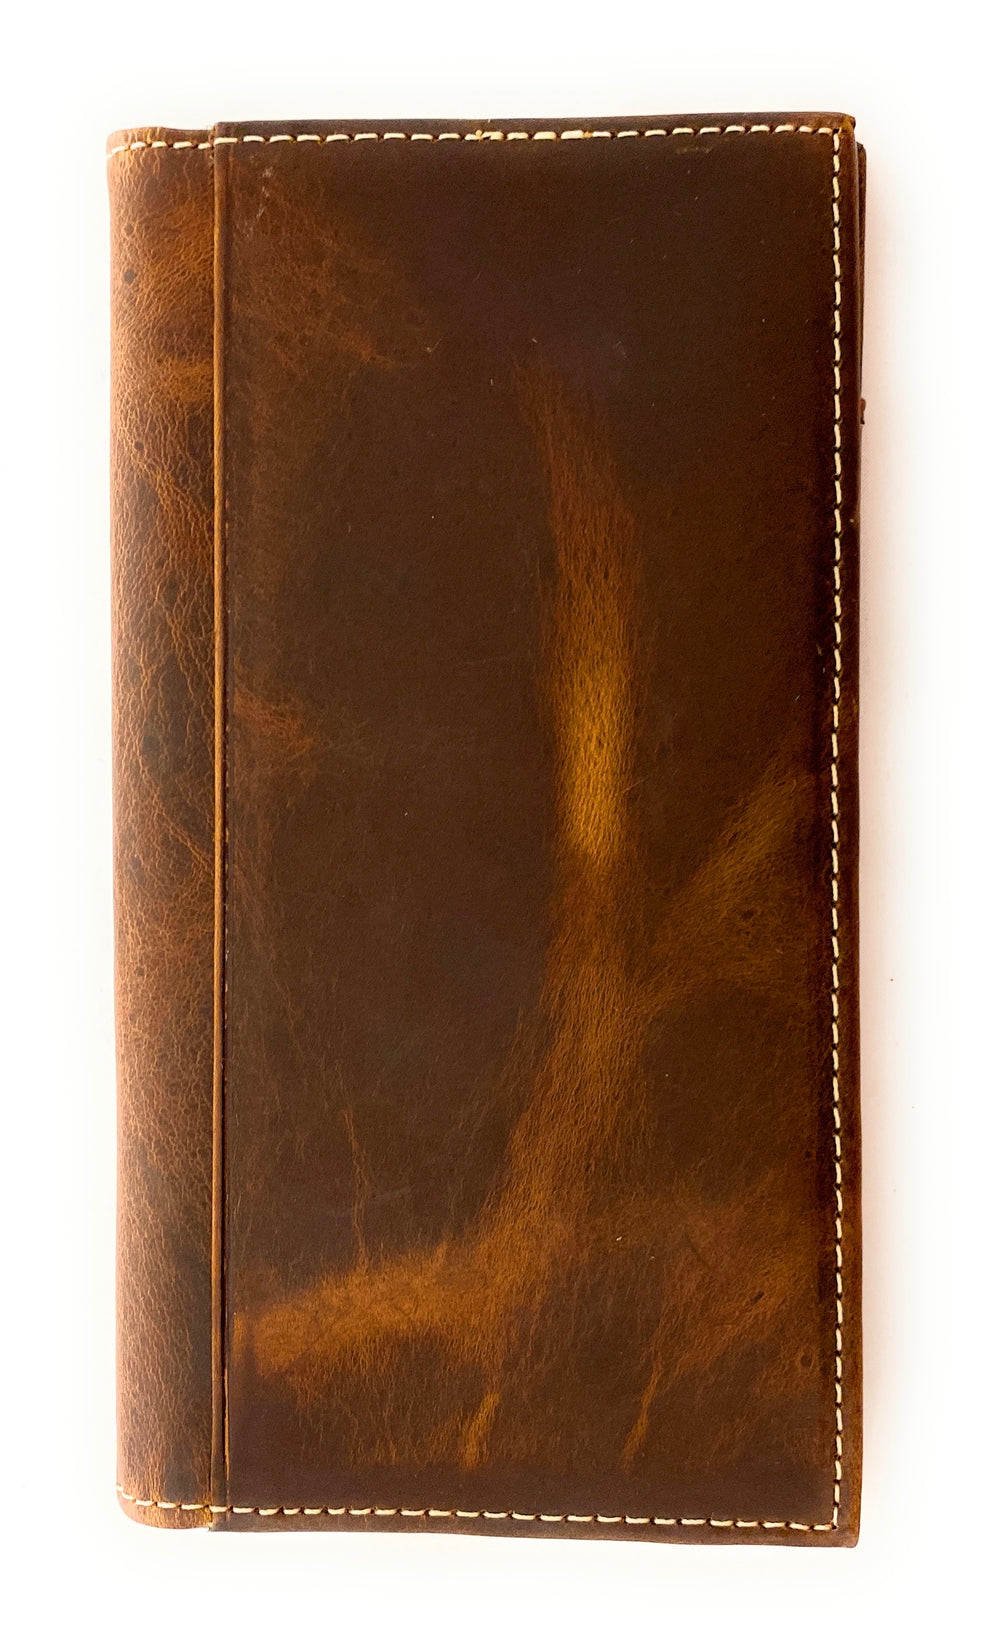 Ariat Mens Leather Wallet - Tan Rodeo